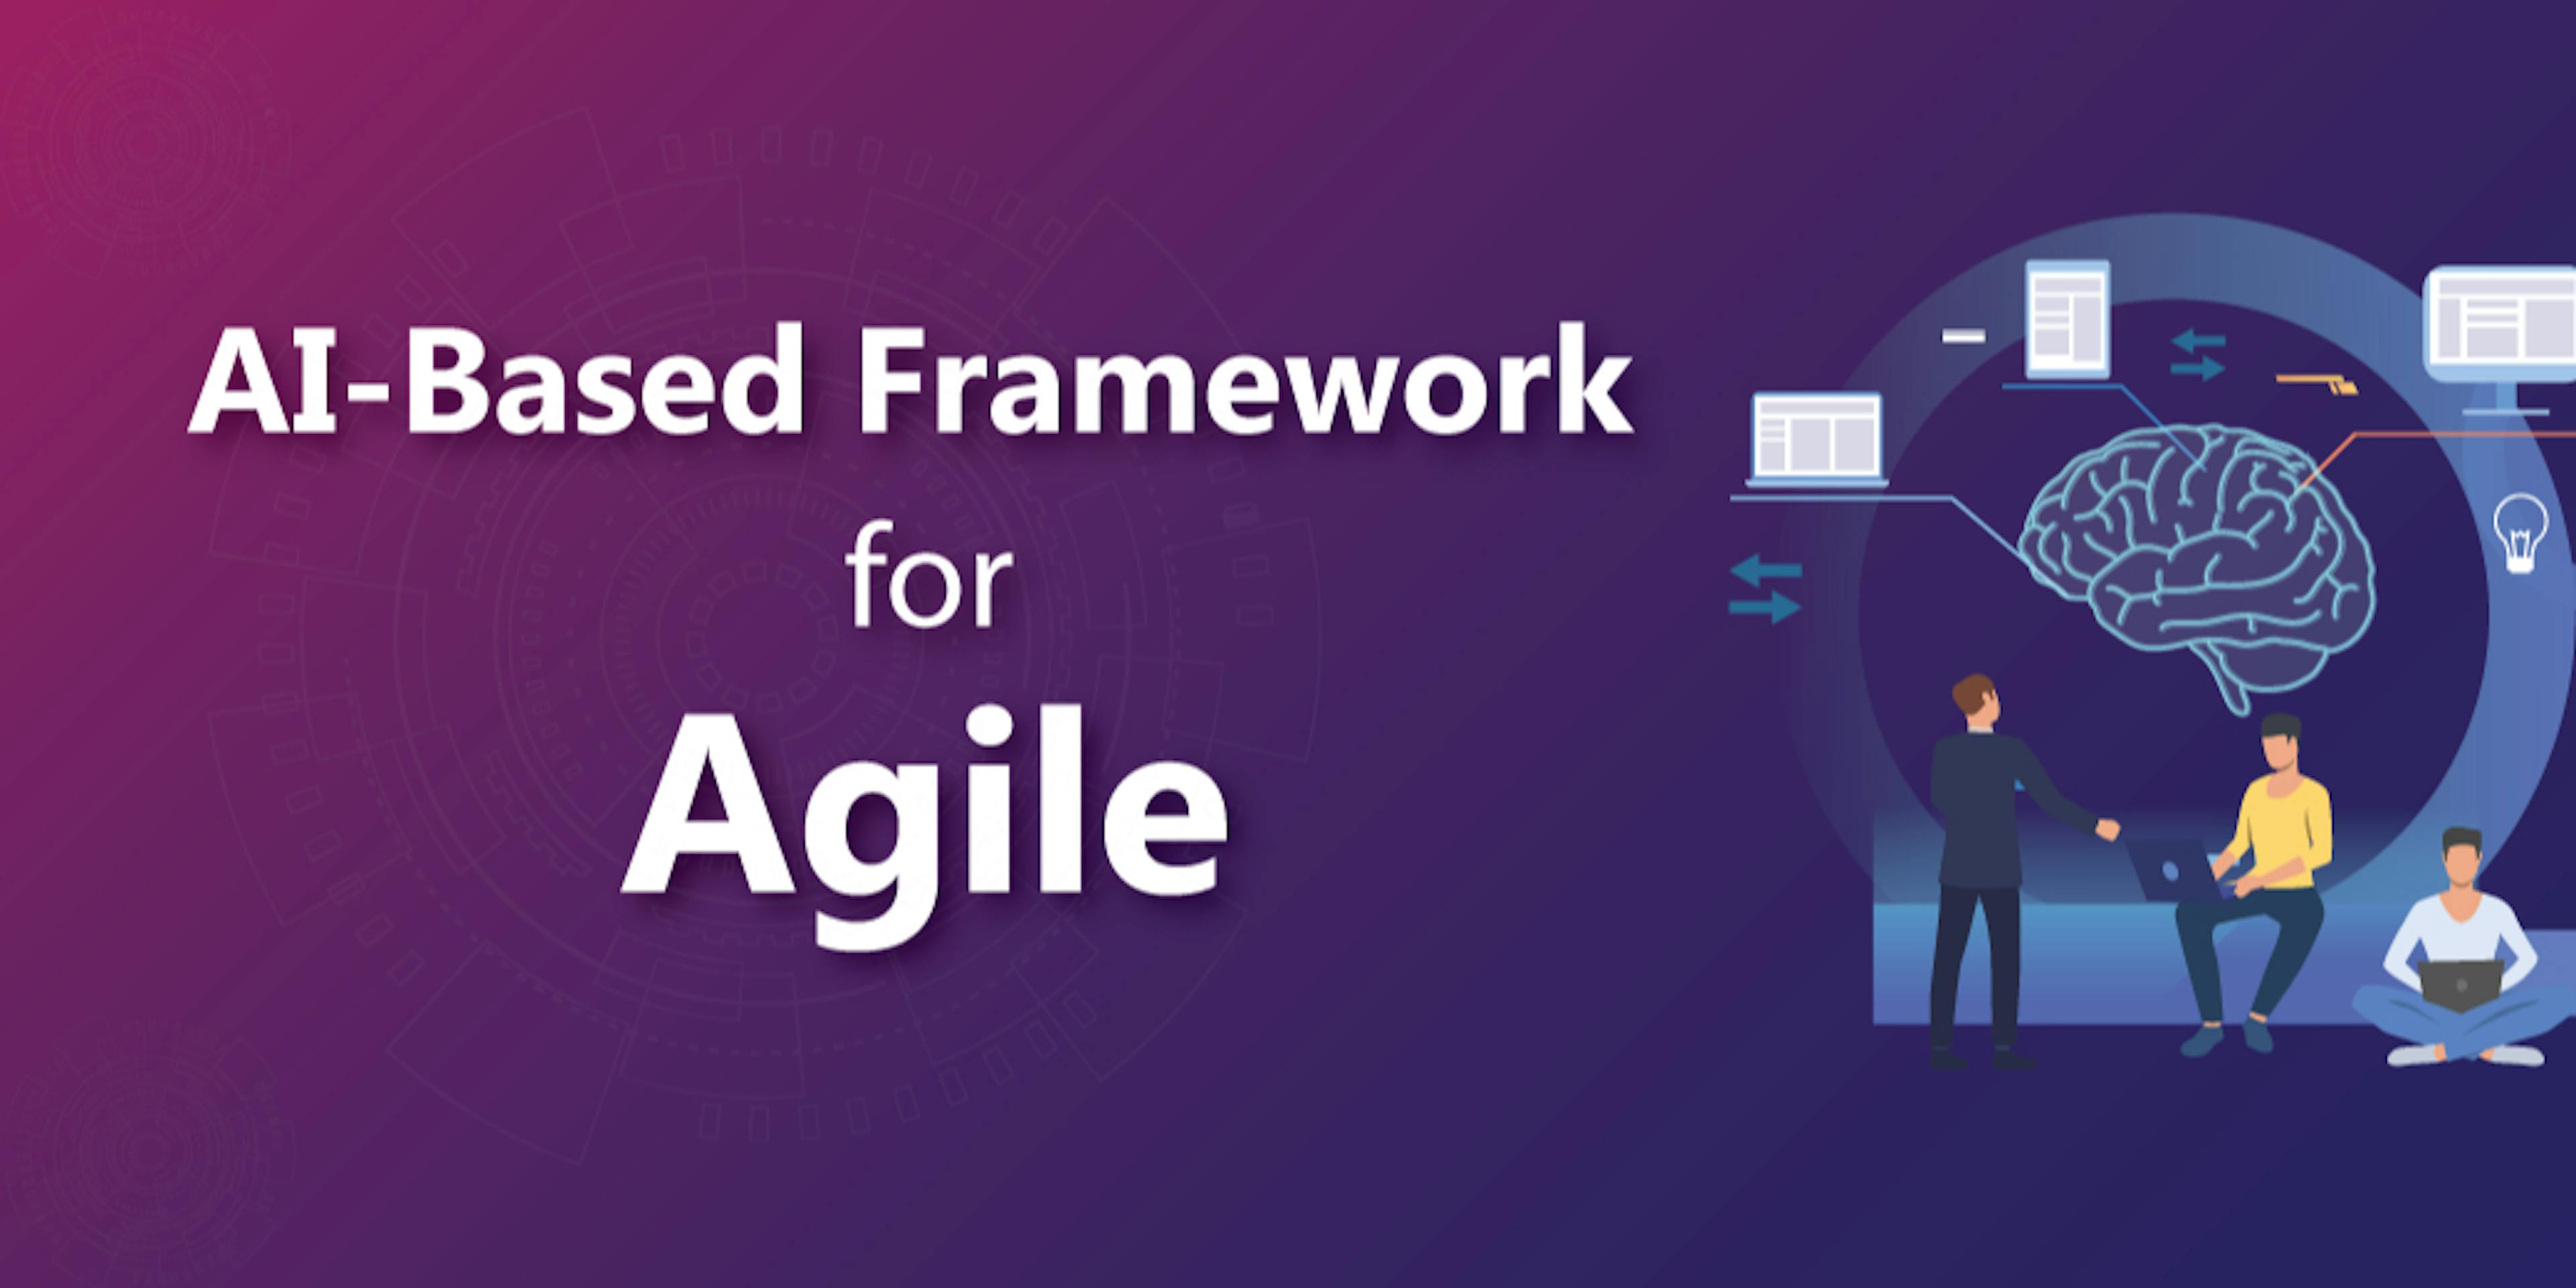 /ai-based-framework-for-agile-project-management-jc1xi3xwh feature image